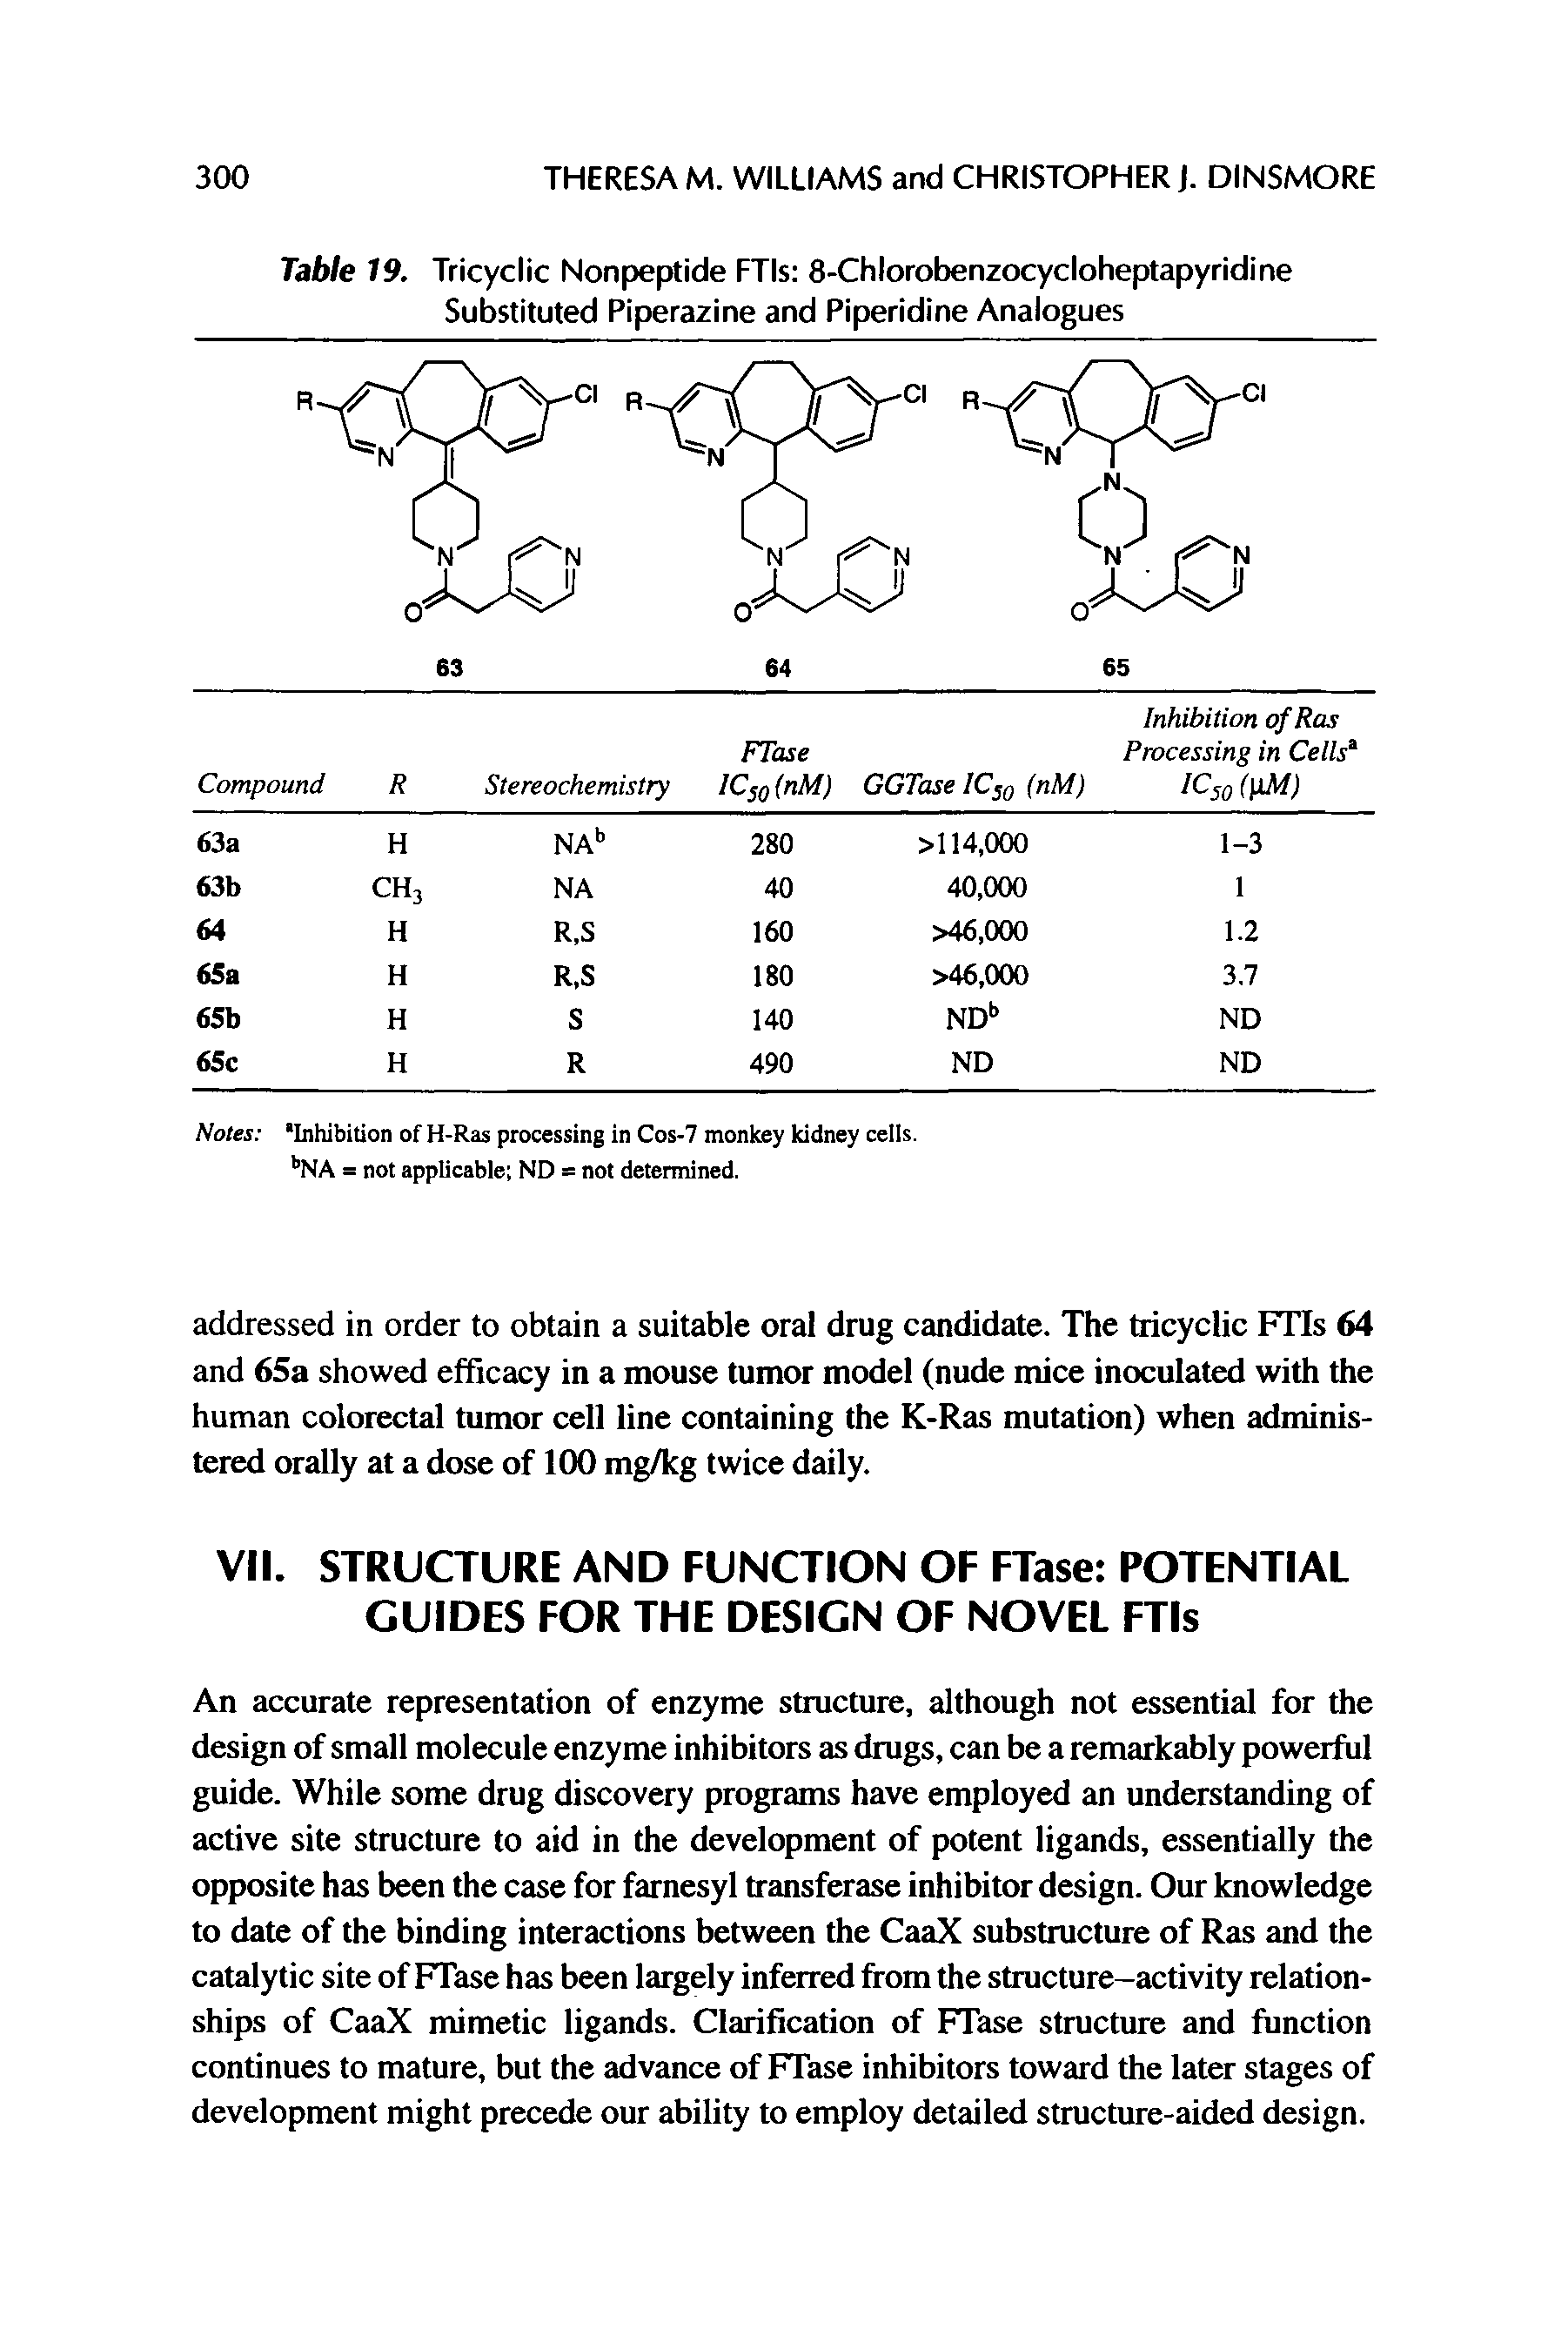 Table 19. Tricyclic Nonpeptide FTIs 8-Chlorobenzocycloheptapyridine Substituted Piperazine and Piperidine Analogues...